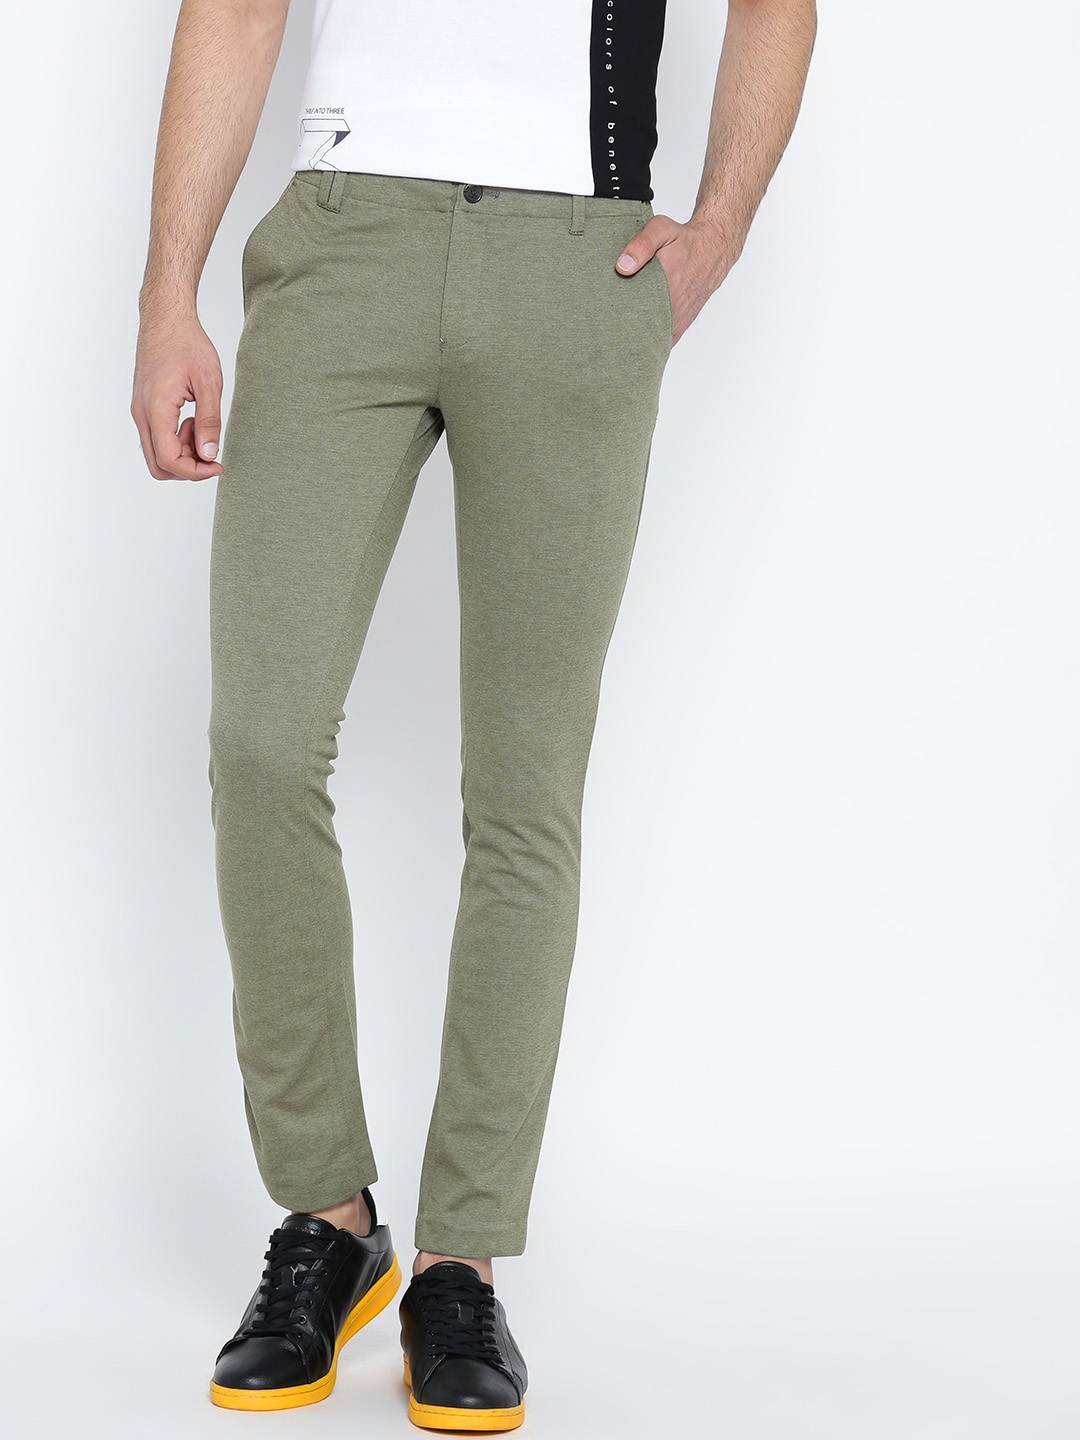 Buy United Colors Of Benetton Men Beige Slim Fit Linen Casual Trousers   Trousers for Men 717614  Myntra